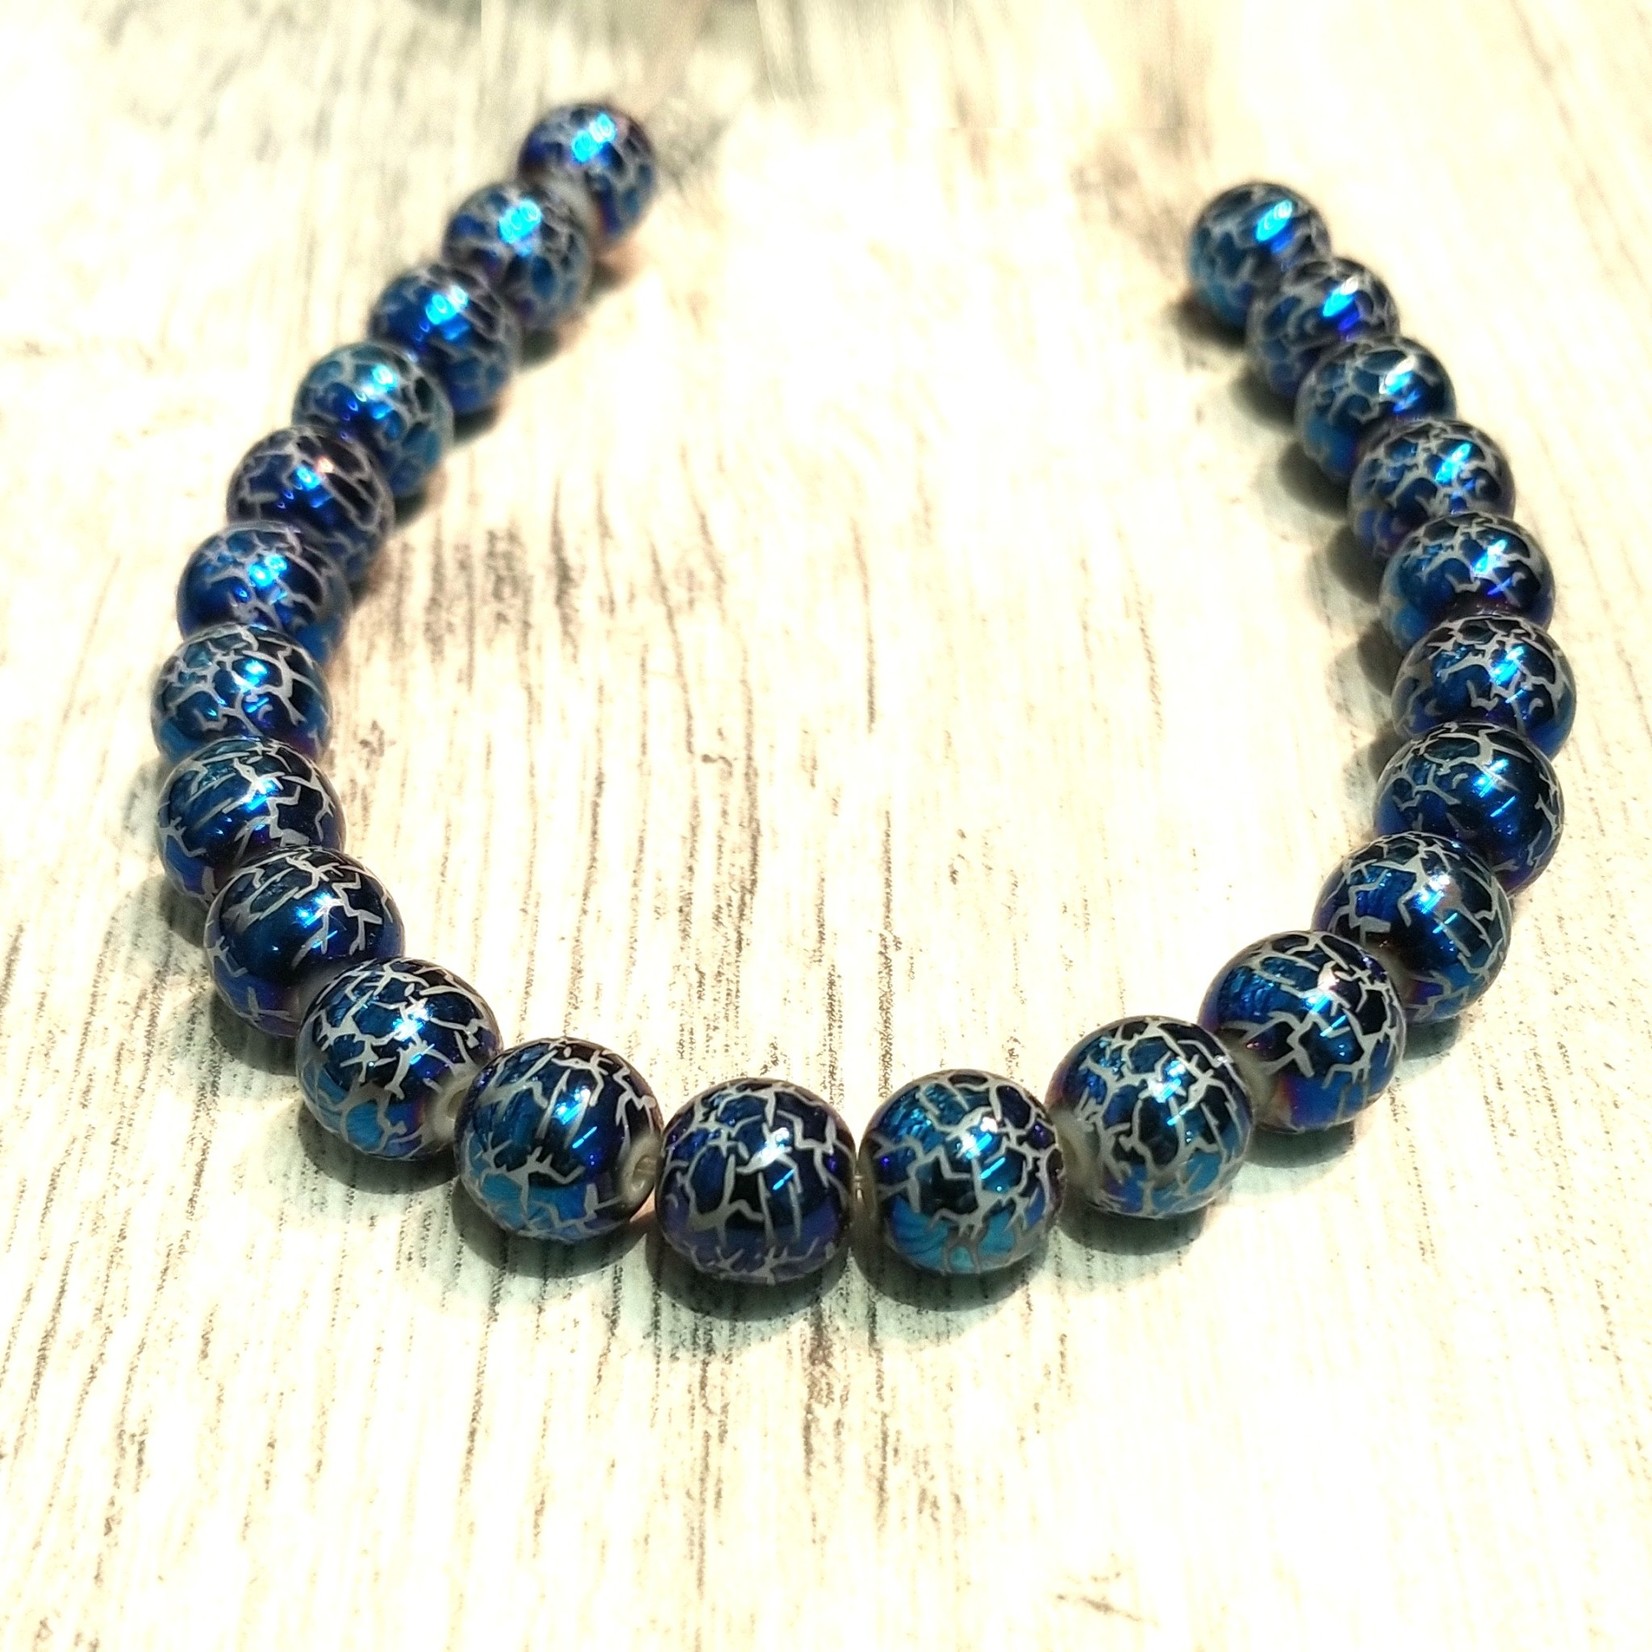 Reflection Glass 8mm Round Cracked Cobalt Bead Strand of 36